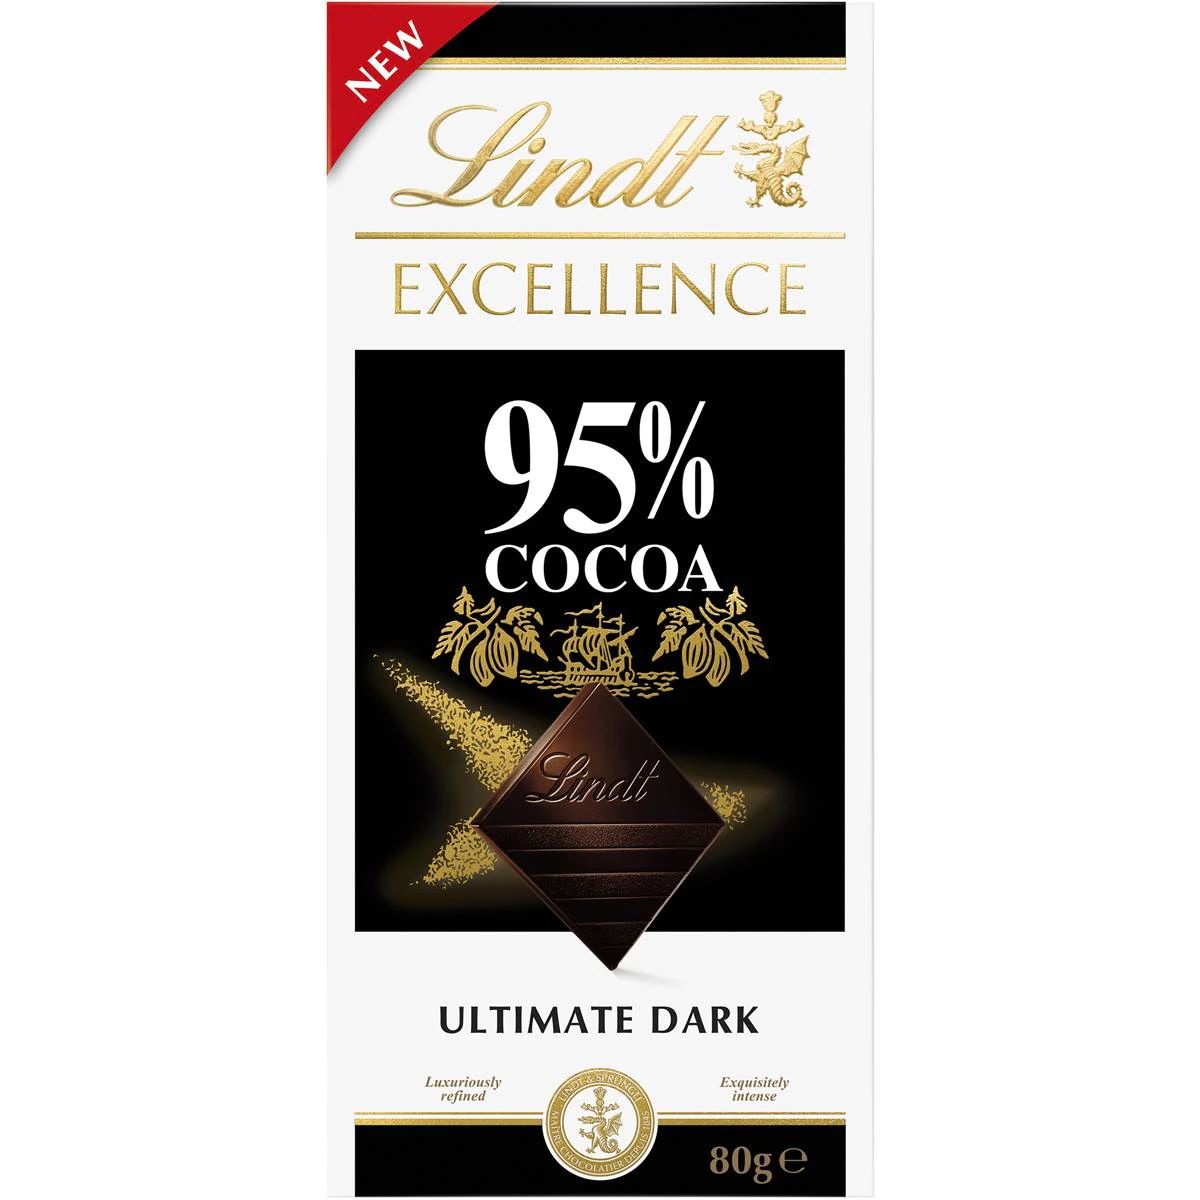 Lindt Excellence 95% Cocoa Ultimate Dark 80g